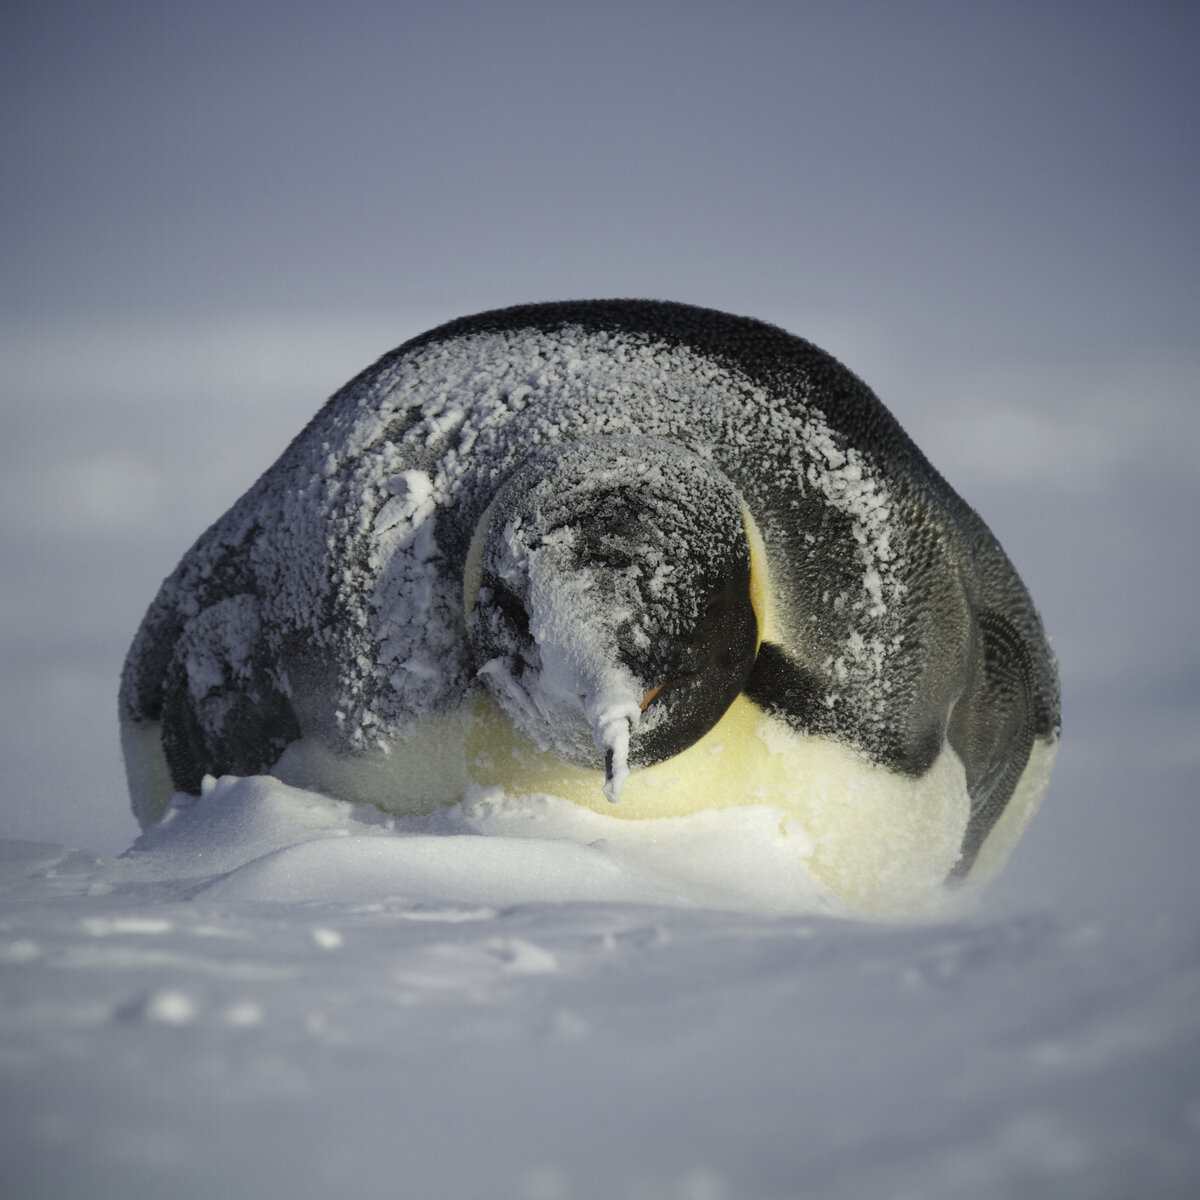 Adult emperor penguin gets covered with snow, during a storm